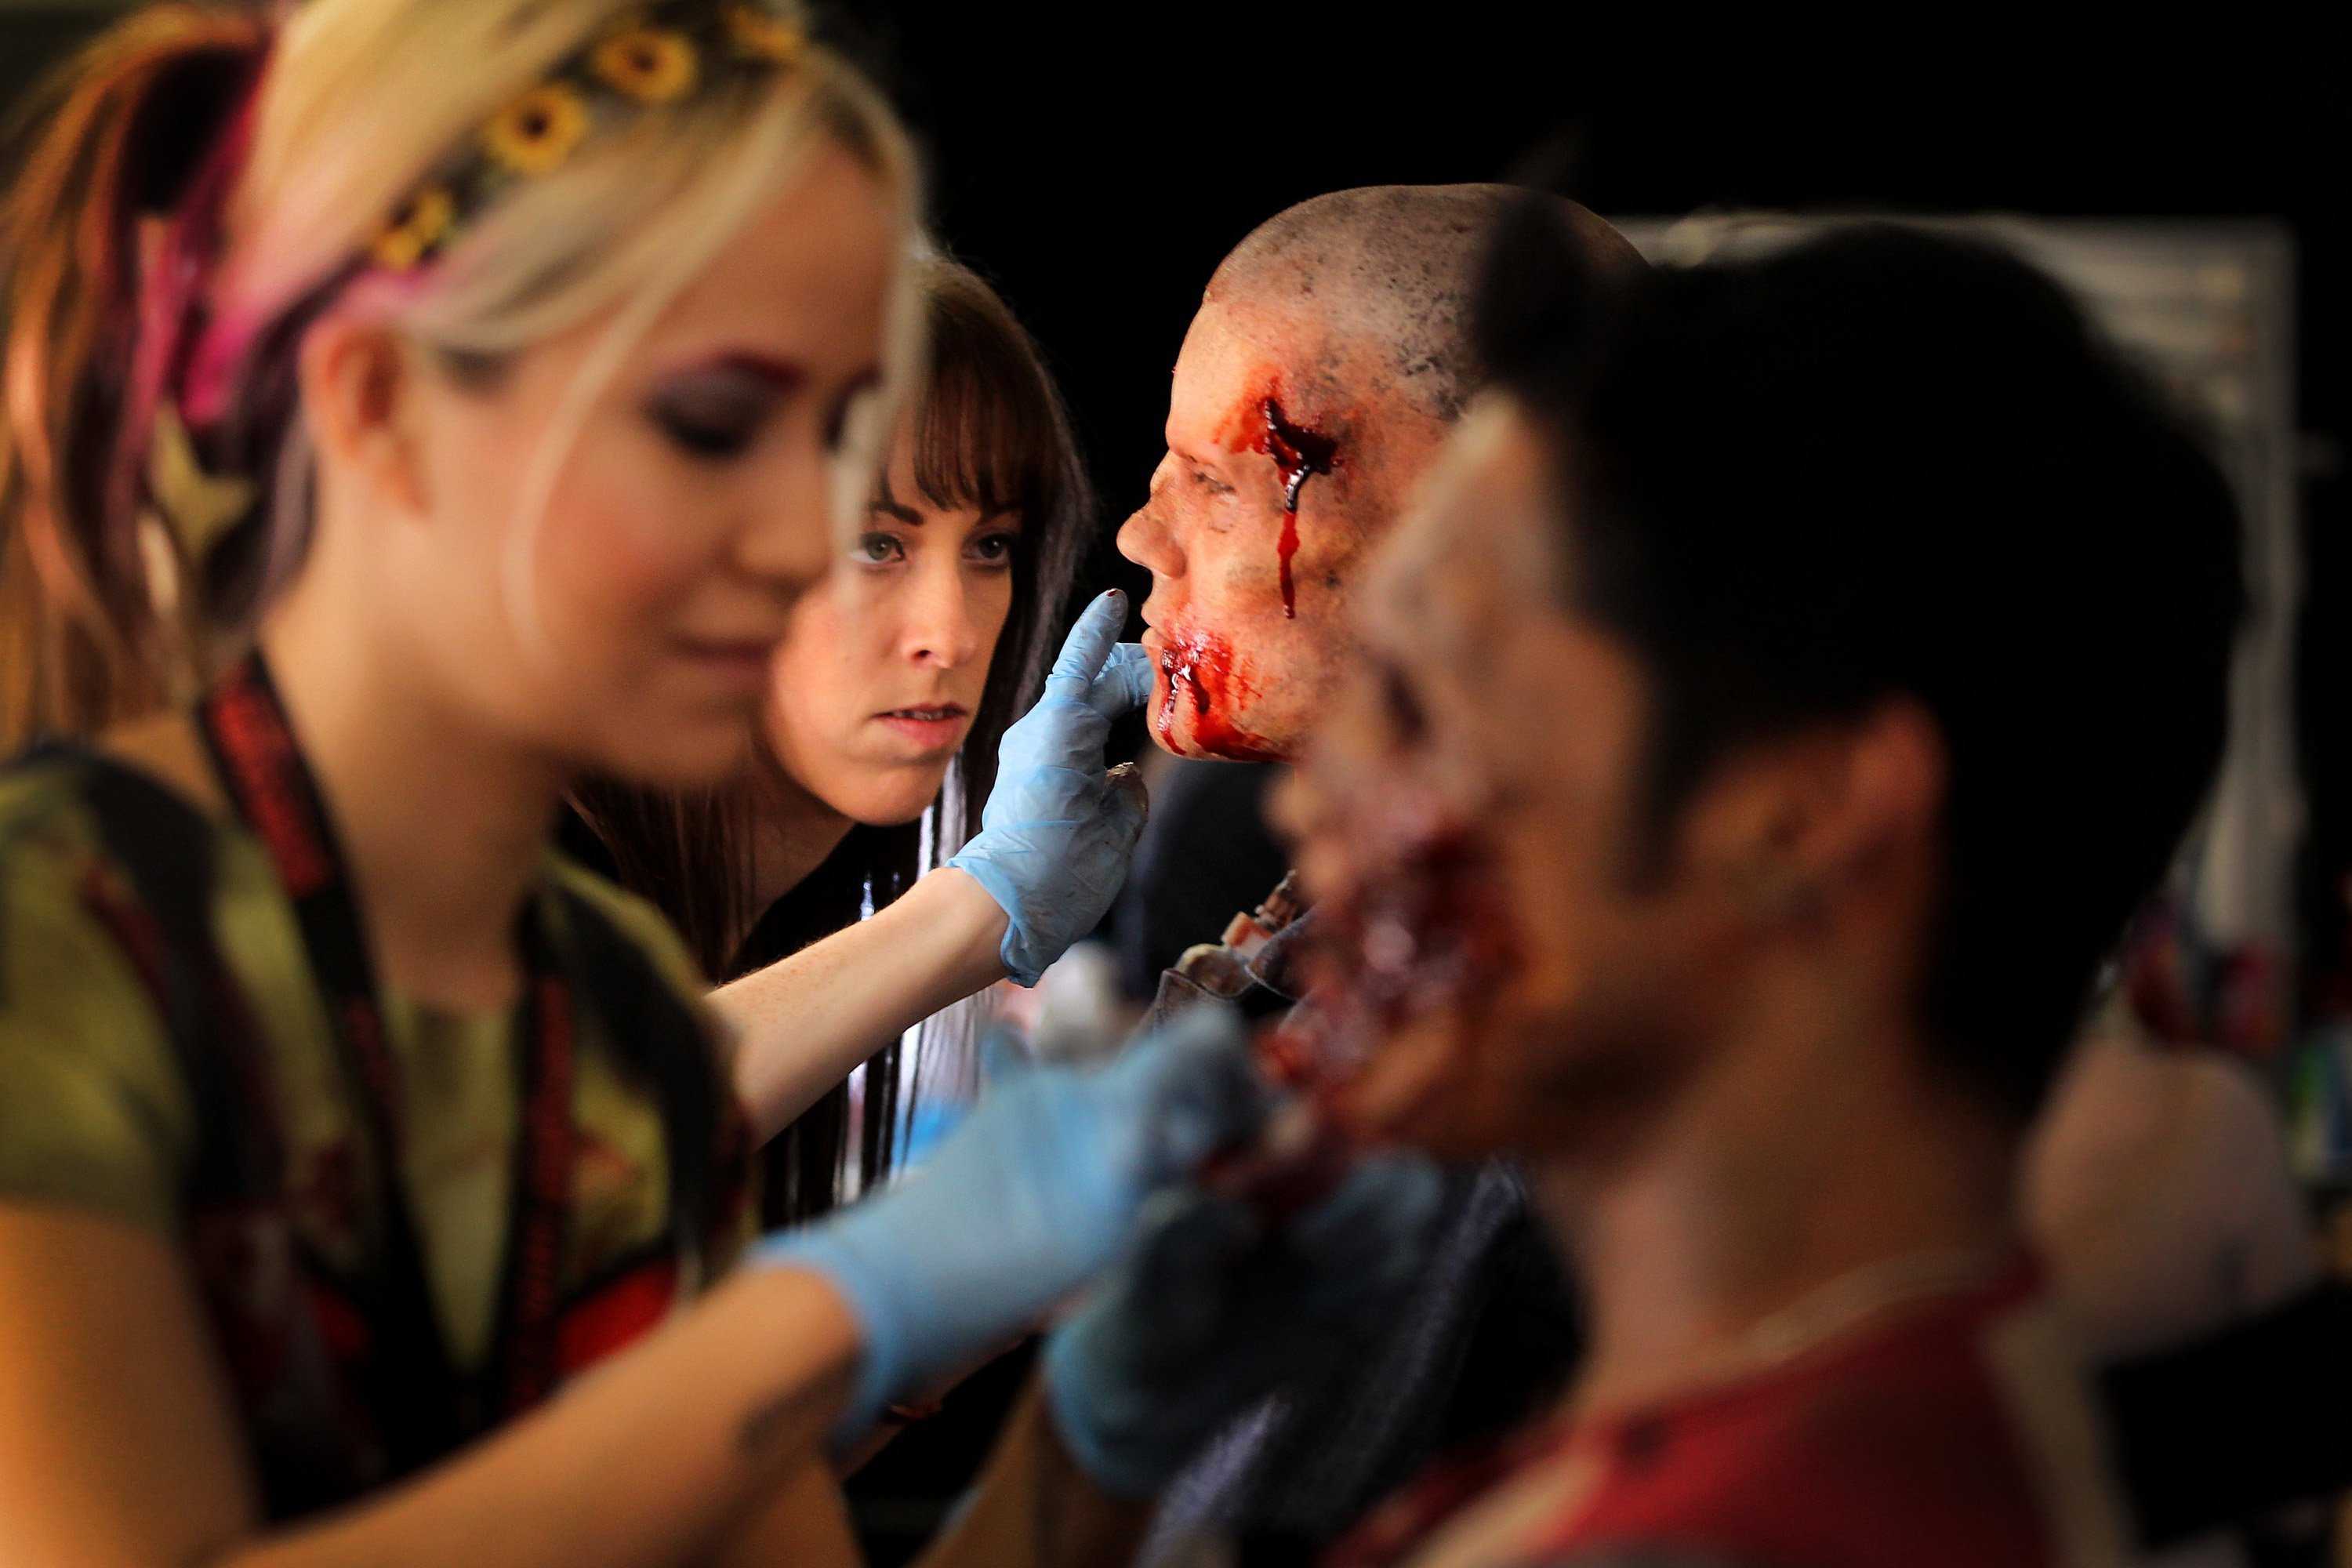 Bloody-looking+makeup+being+applied+to+actors+faces